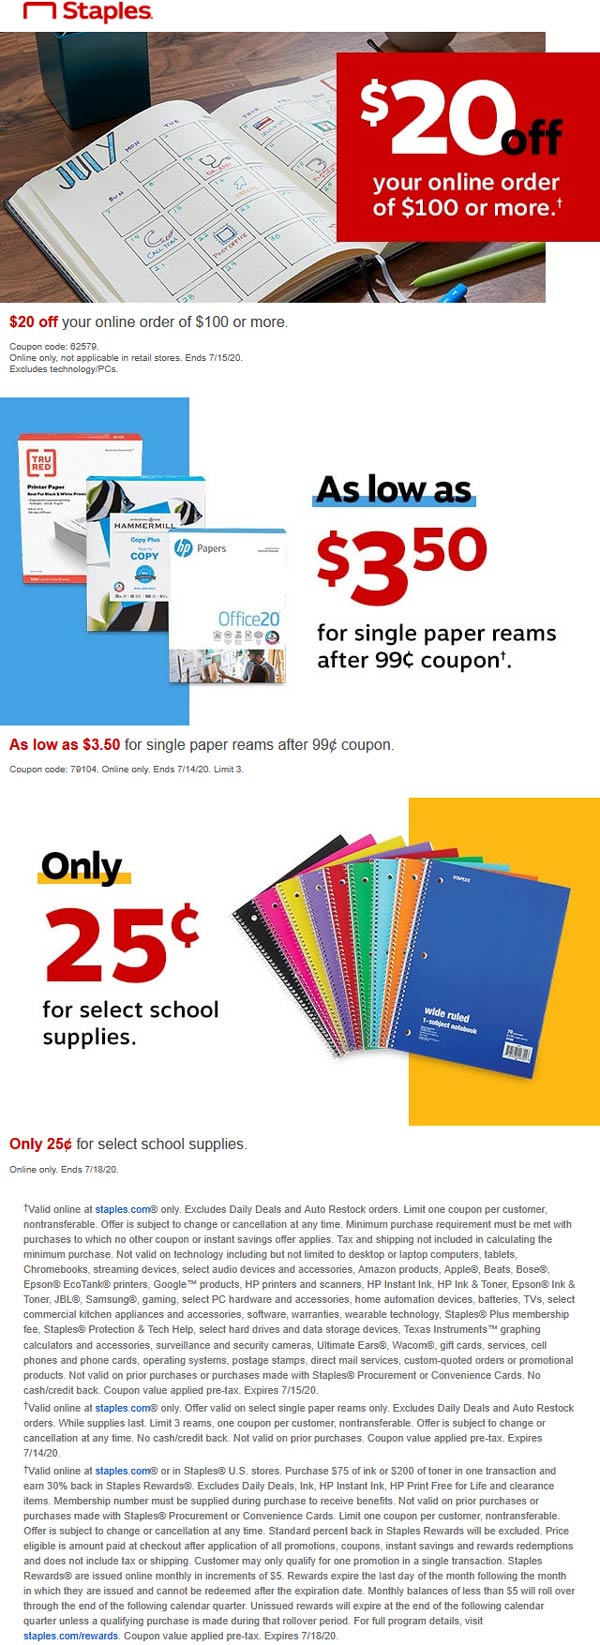 Staples stores Coupon  .25 cent school supplies & $20 off $100 online at Staples via promo code 62579 #staples giftguide personalstylist accordingtomony allthatglitters anitalianaffair bestgifts christmasinnewyork christmaslist classicwithaflair declutter itallstartsfromyourcloset 